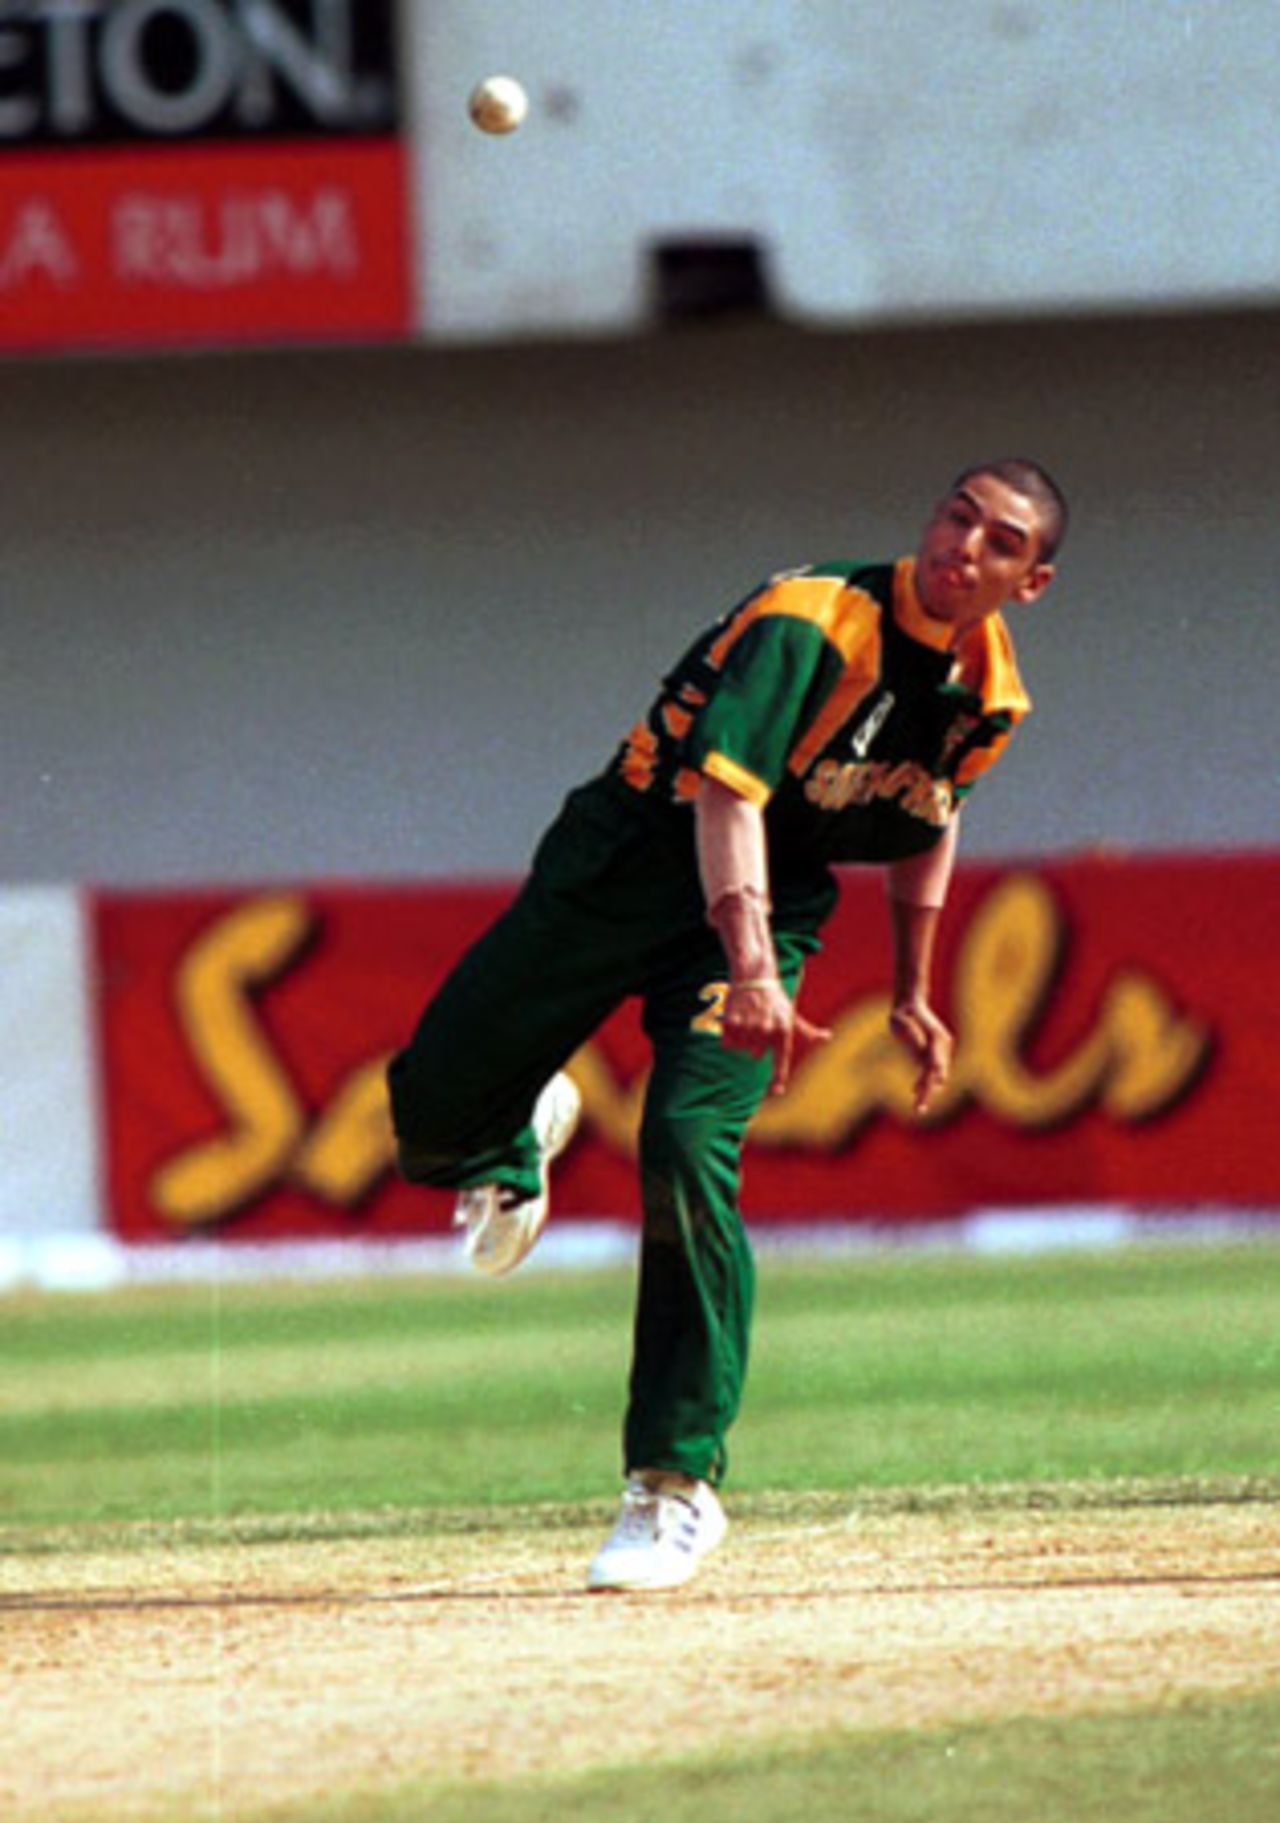 Justin Ontong spinning away, 4th ODI at Queen's Park (New) St George's, Grenada , 6th May 2001